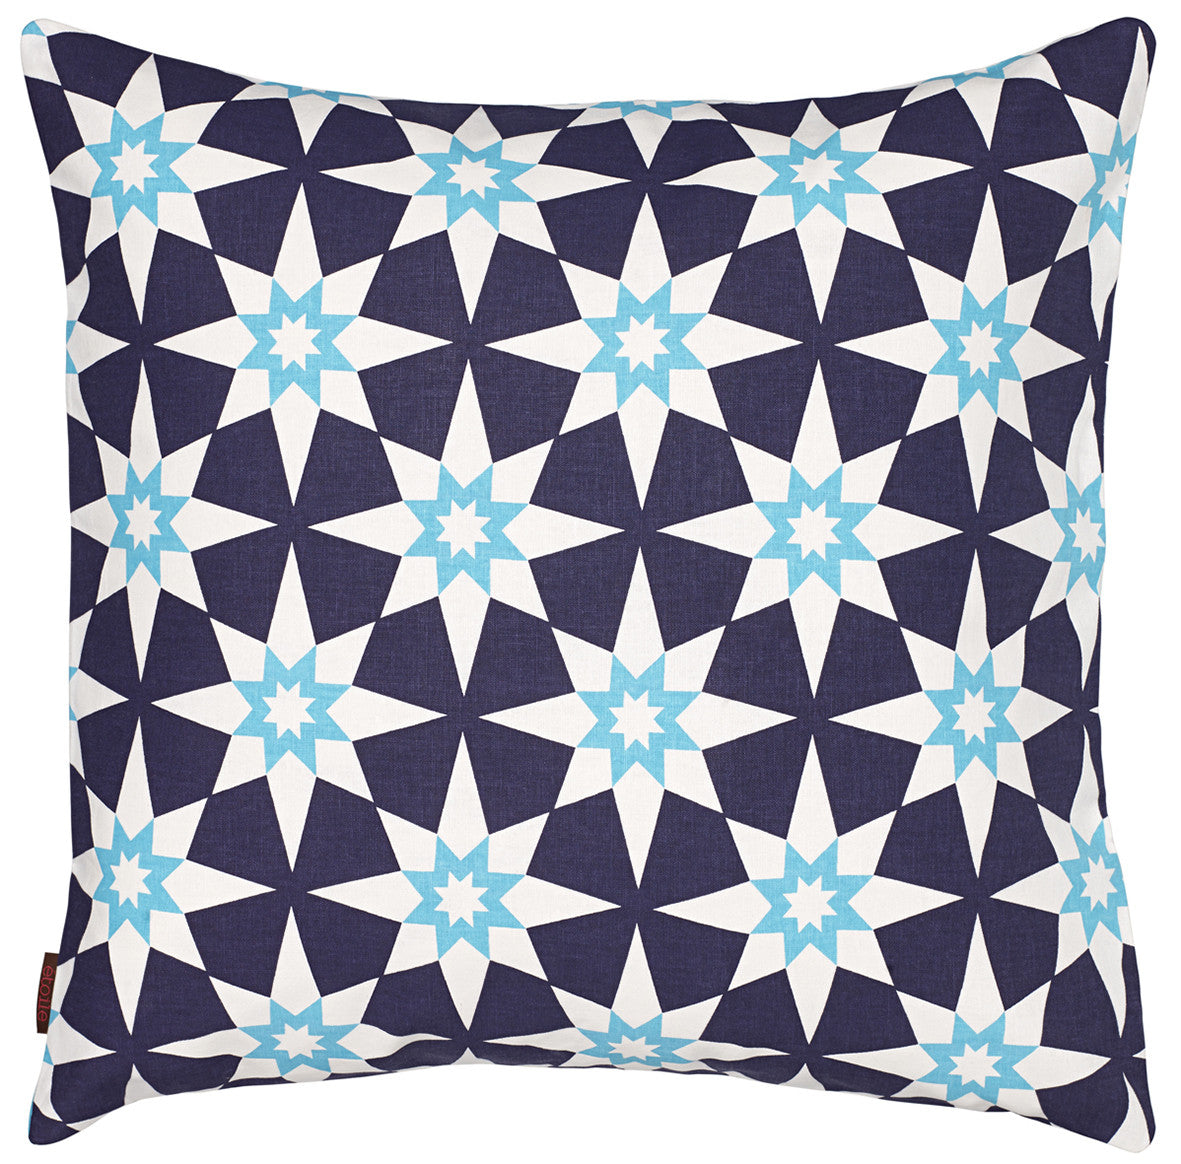 Cadiz Geometric Star Pattern Linen Throw Pillow in Aubergine Purple and Turquoise 55x55cm (22x22") ships from Canada worldwide including the USA